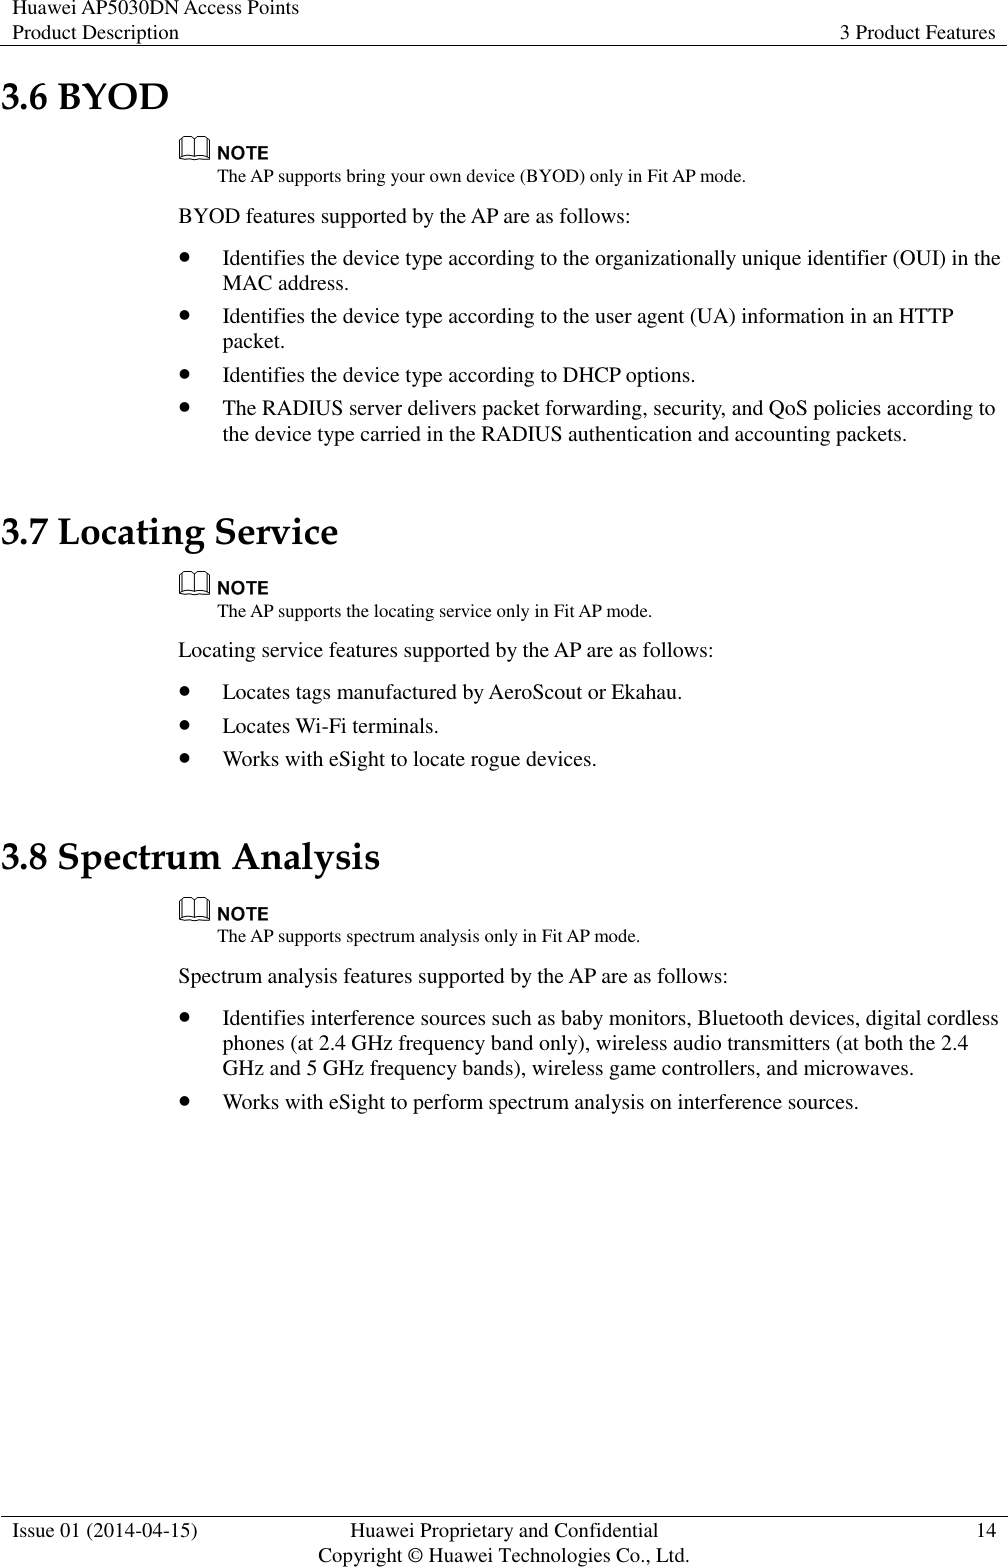 Huawei AP5030DN Access Points Product Description 3 Product Features  Issue 01 (2014-04-15) Huawei Proprietary and Confidential                                     Copyright © Huawei Technologies Co., Ltd. 14  3.6 BYOD  The AP supports bring your own device (BYOD) only in Fit AP mode. BYOD features supported by the AP are as follows:  Identifies the device type according to the organizationally unique identifier (OUI) in the MAC address.  Identifies the device type according to the user agent (UA) information in an HTTP packet.  Identifies the device type according to DHCP options.  The RADIUS server delivers packet forwarding, security, and QoS policies according to the device type carried in the RADIUS authentication and accounting packets. 3.7 Locating Service  The AP supports the locating service only in Fit AP mode. Locating service features supported by the AP are as follows:  Locates tags manufactured by AeroScout or Ekahau.  Locates Wi-Fi terminals.  Works with eSight to locate rogue devices. 3.8 Spectrum Analysis  The AP supports spectrum analysis only in Fit AP mode. Spectrum analysis features supported by the AP are as follows:  Identifies interference sources such as baby monitors, Bluetooth devices, digital cordless phones (at 2.4 GHz frequency band only), wireless audio transmitters (at both the 2.4 GHz and 5 GHz frequency bands), wireless game controllers, and microwaves.  Works with eSight to perform spectrum analysis on interference sources. 